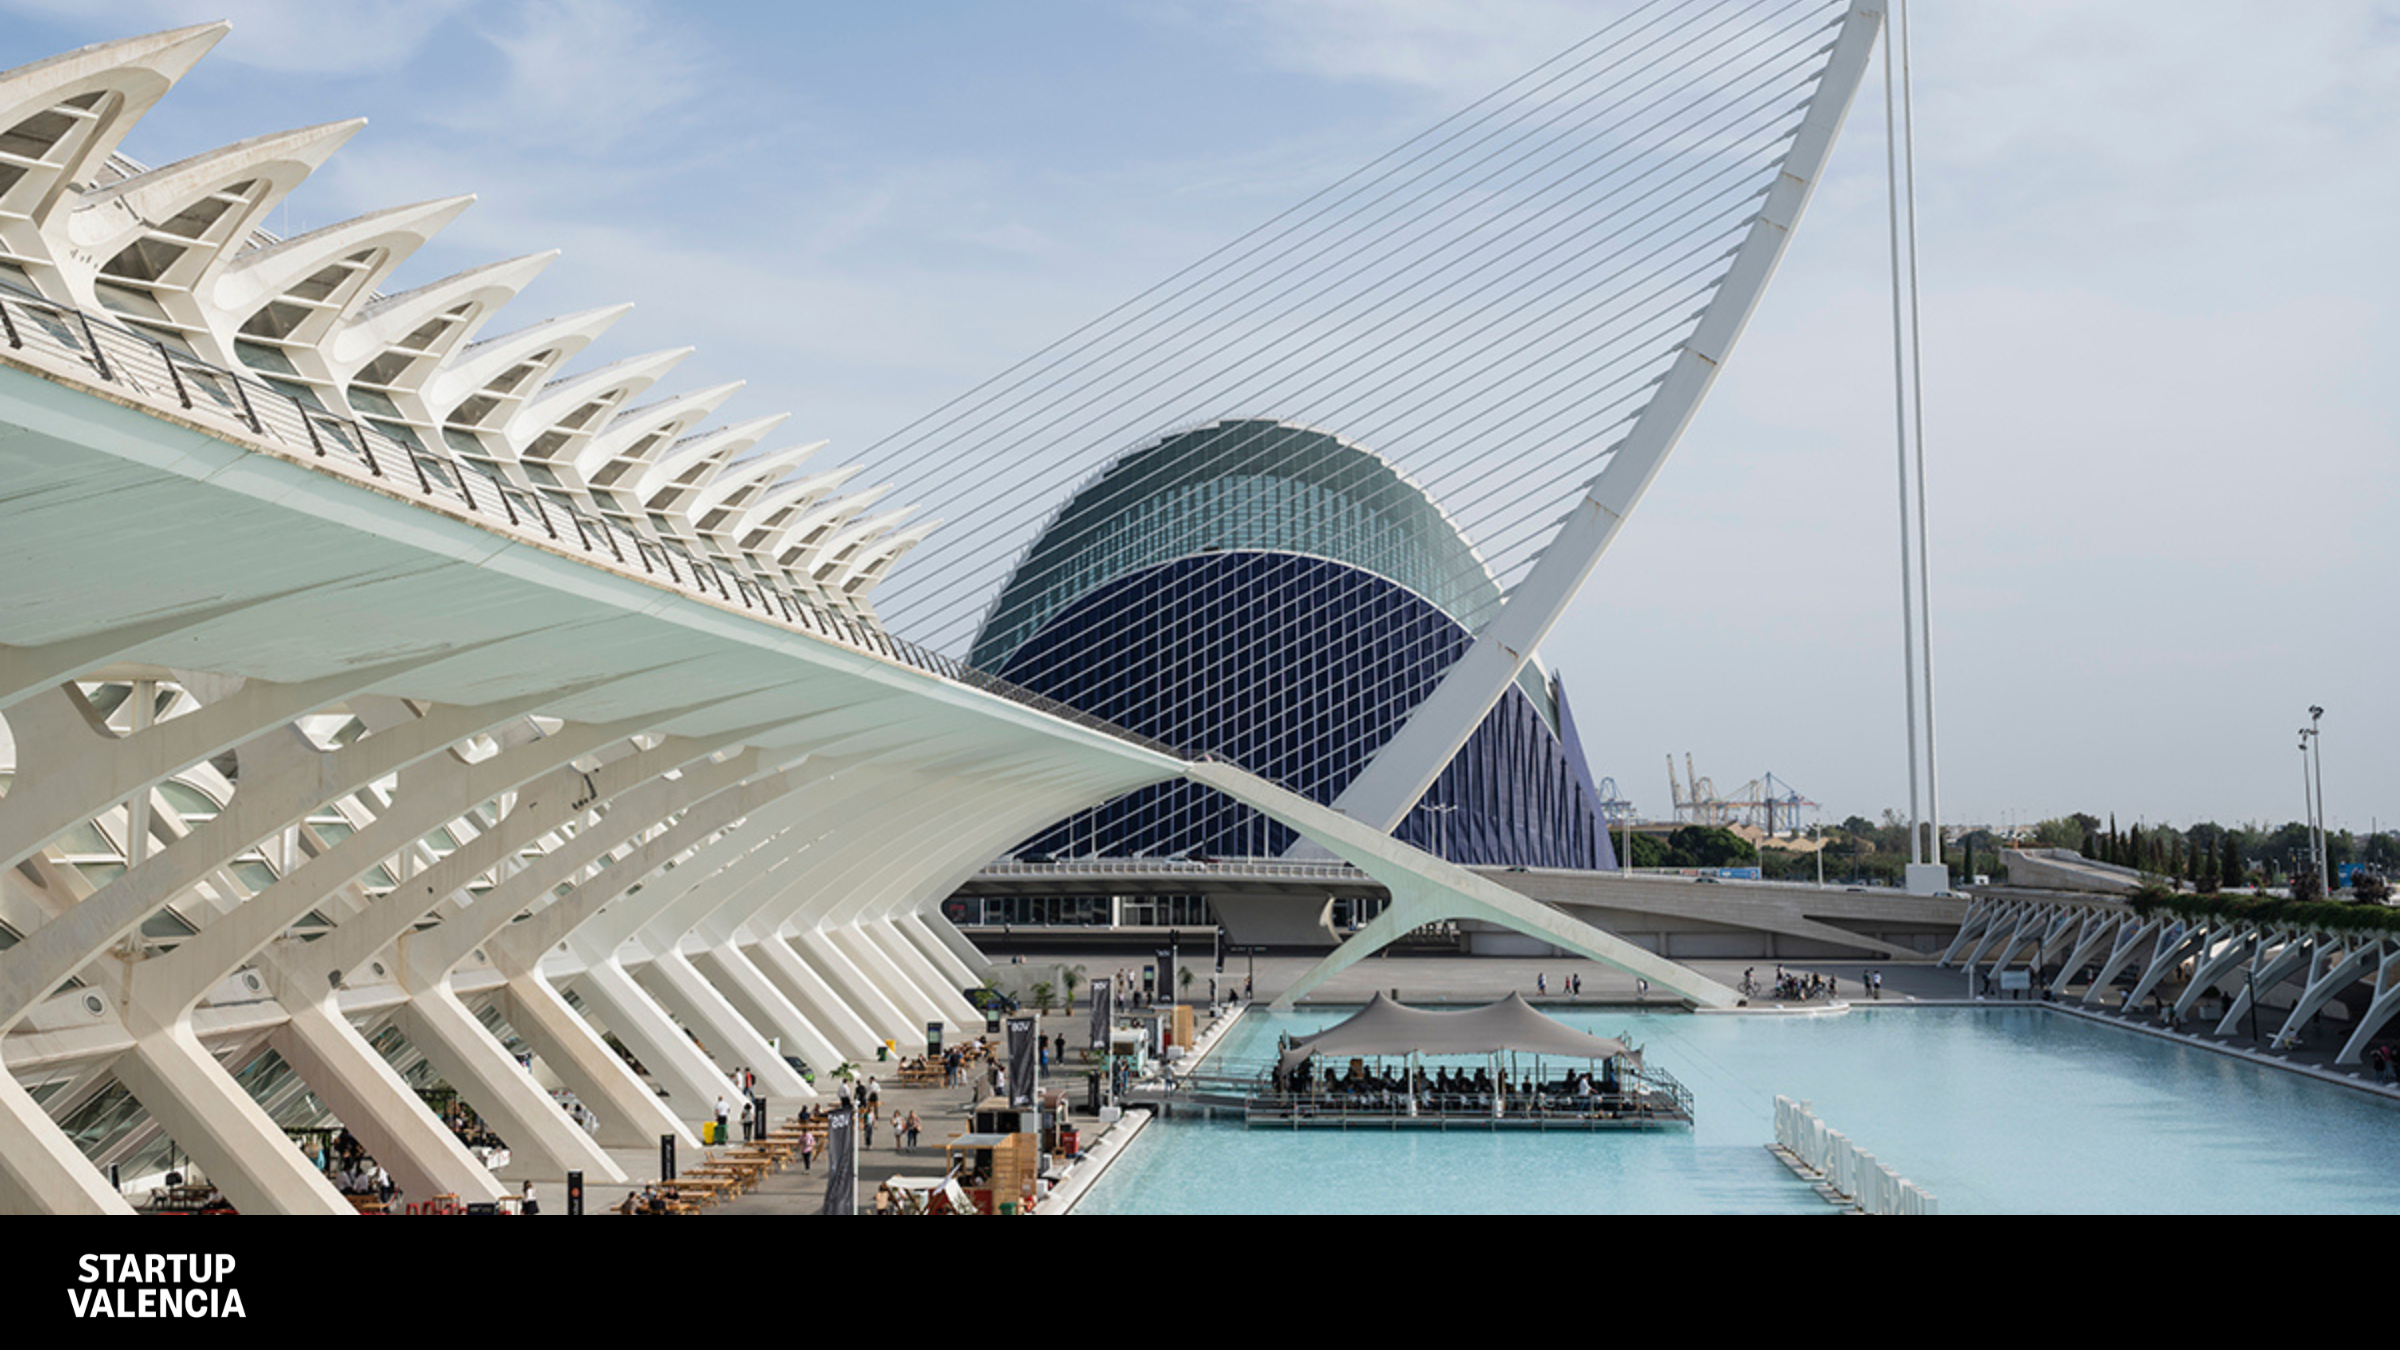 How to get to Valencia Digital Summit